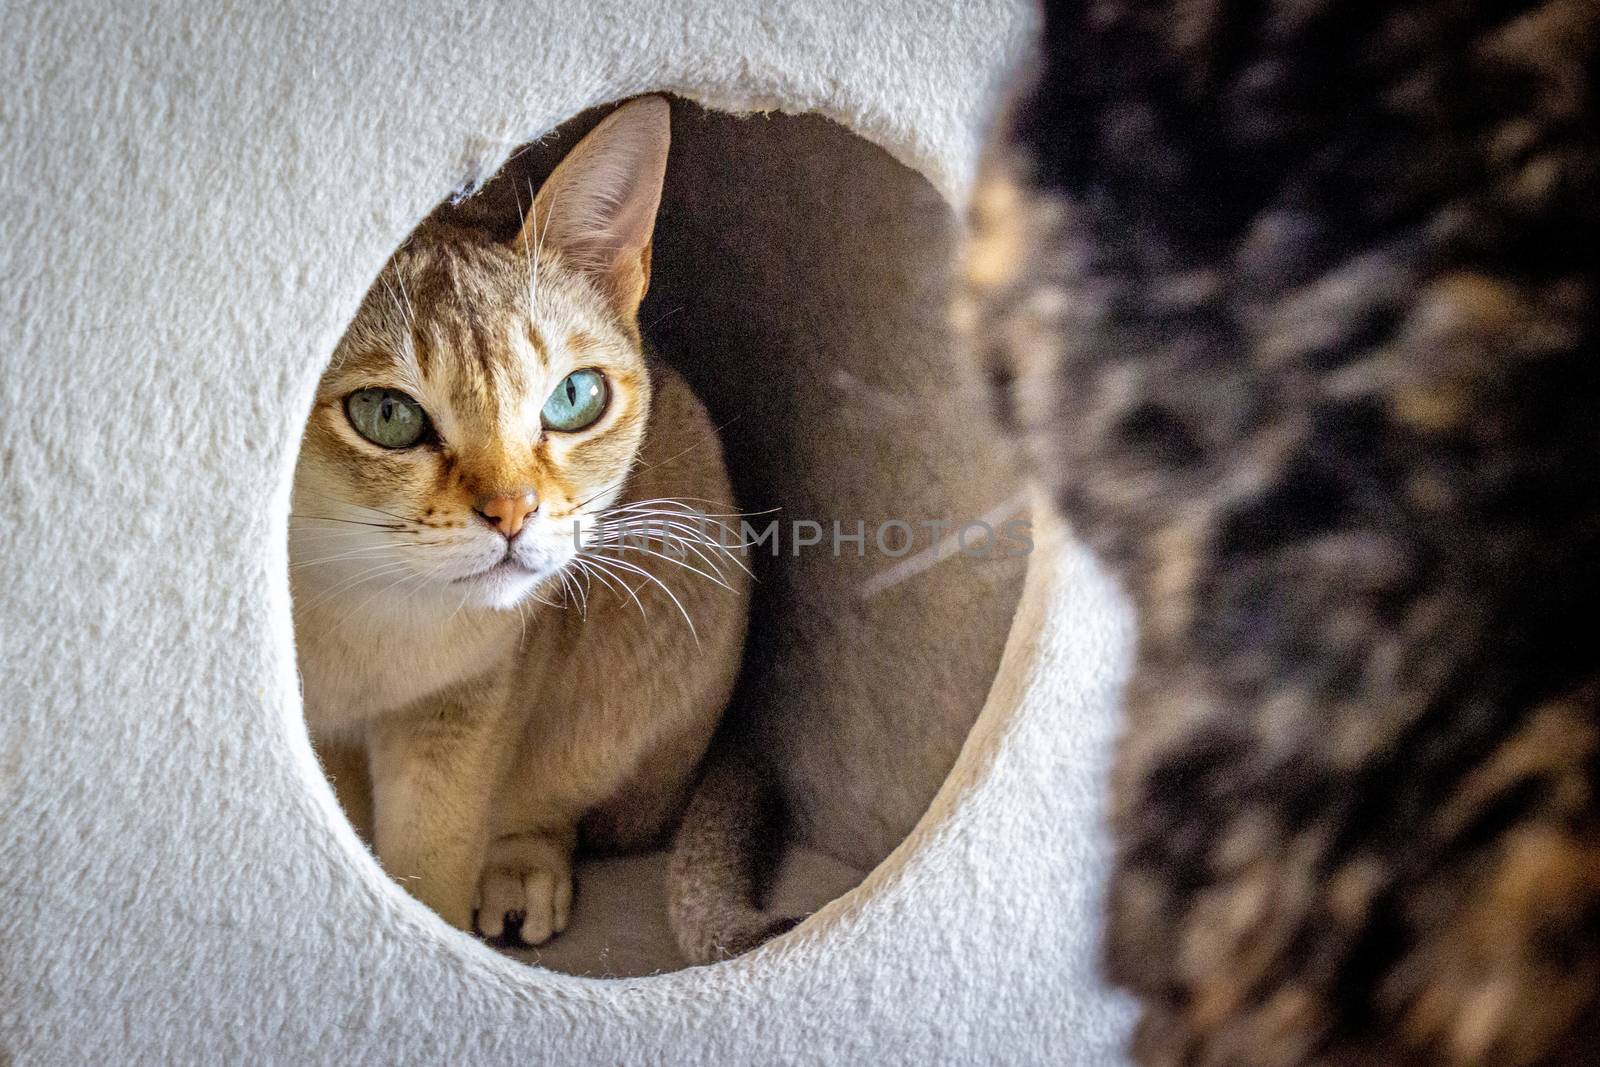 Singapura,A cat hiding in the cat house and looking out at another cat. by Umbrella